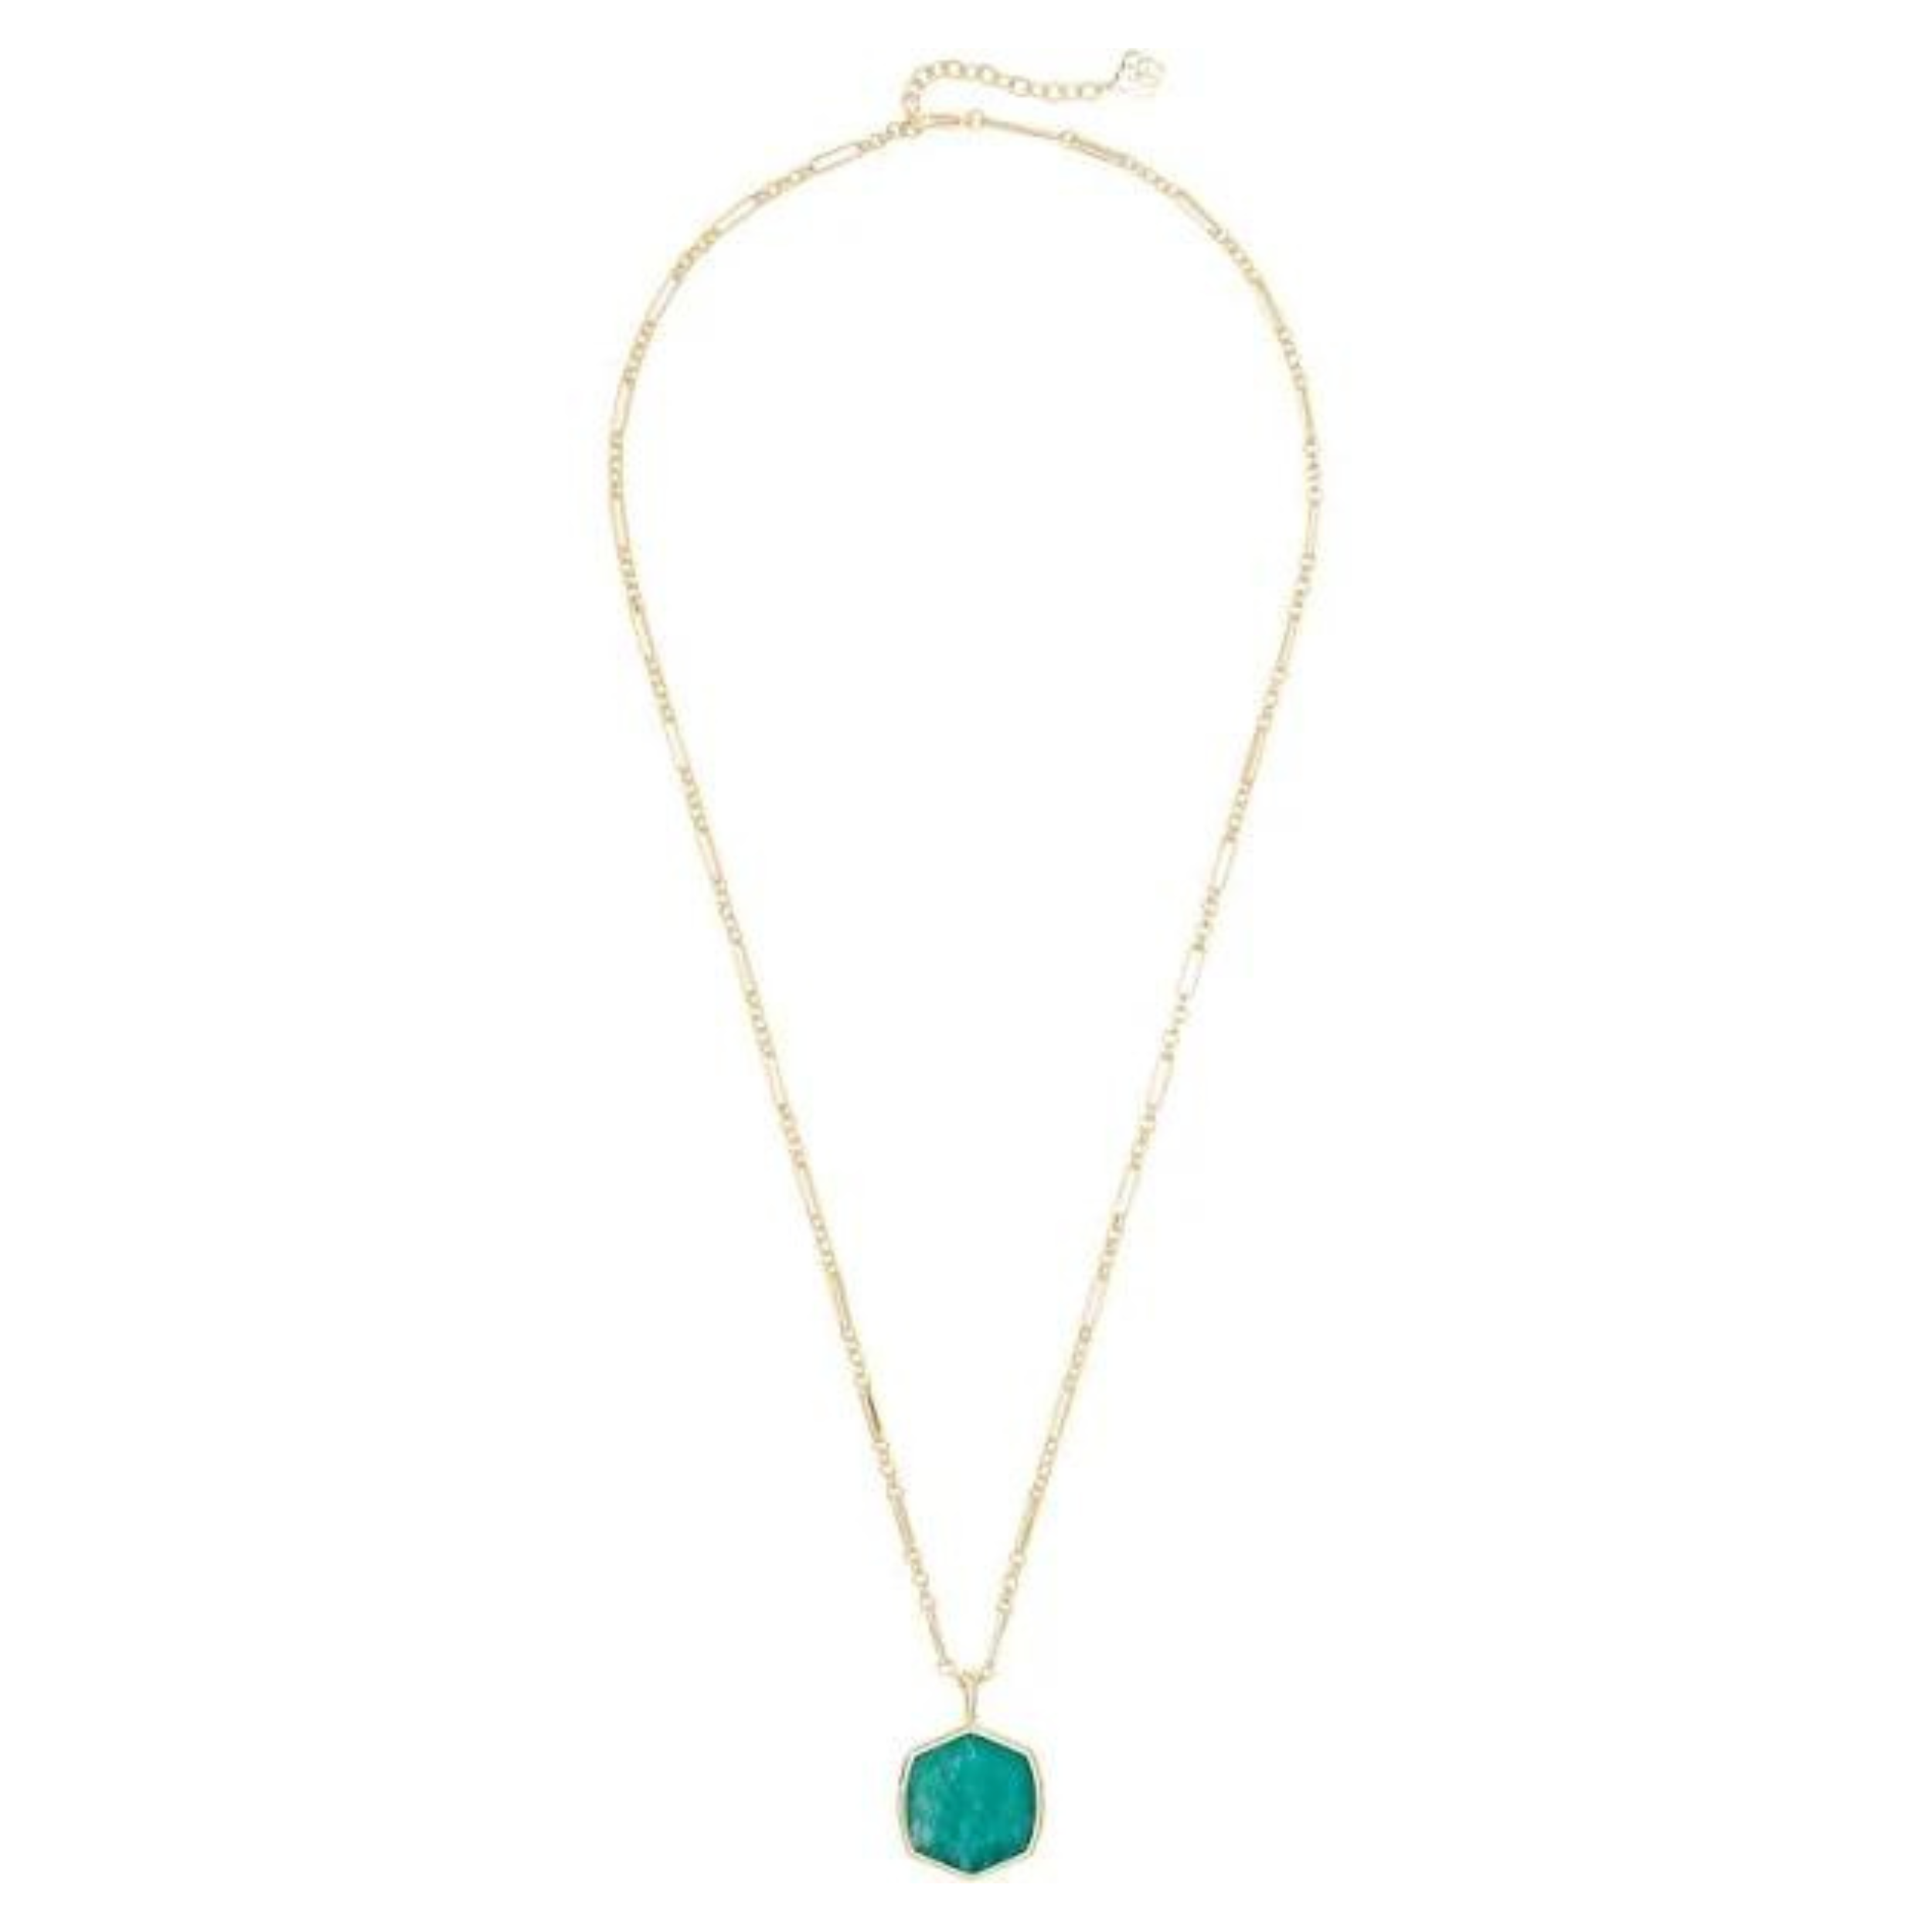 Kendra Scott |  Davis Large Long Pendant Necklace in Gold Dark Teal Amazonite - Giddy Up Glamour Boutique